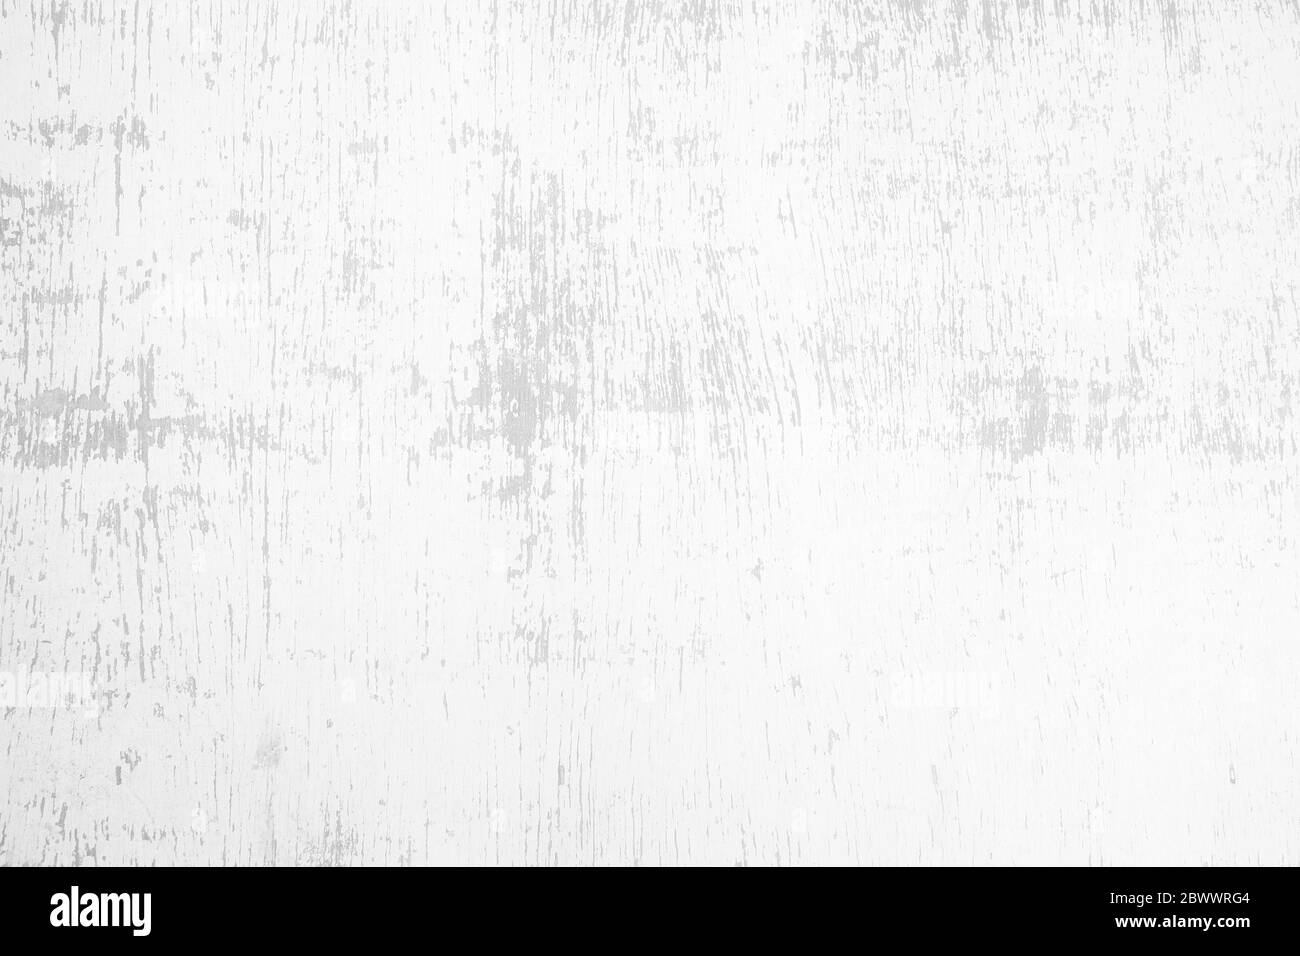 White Peeling Paint on Wooden Board Background. Stock Photo